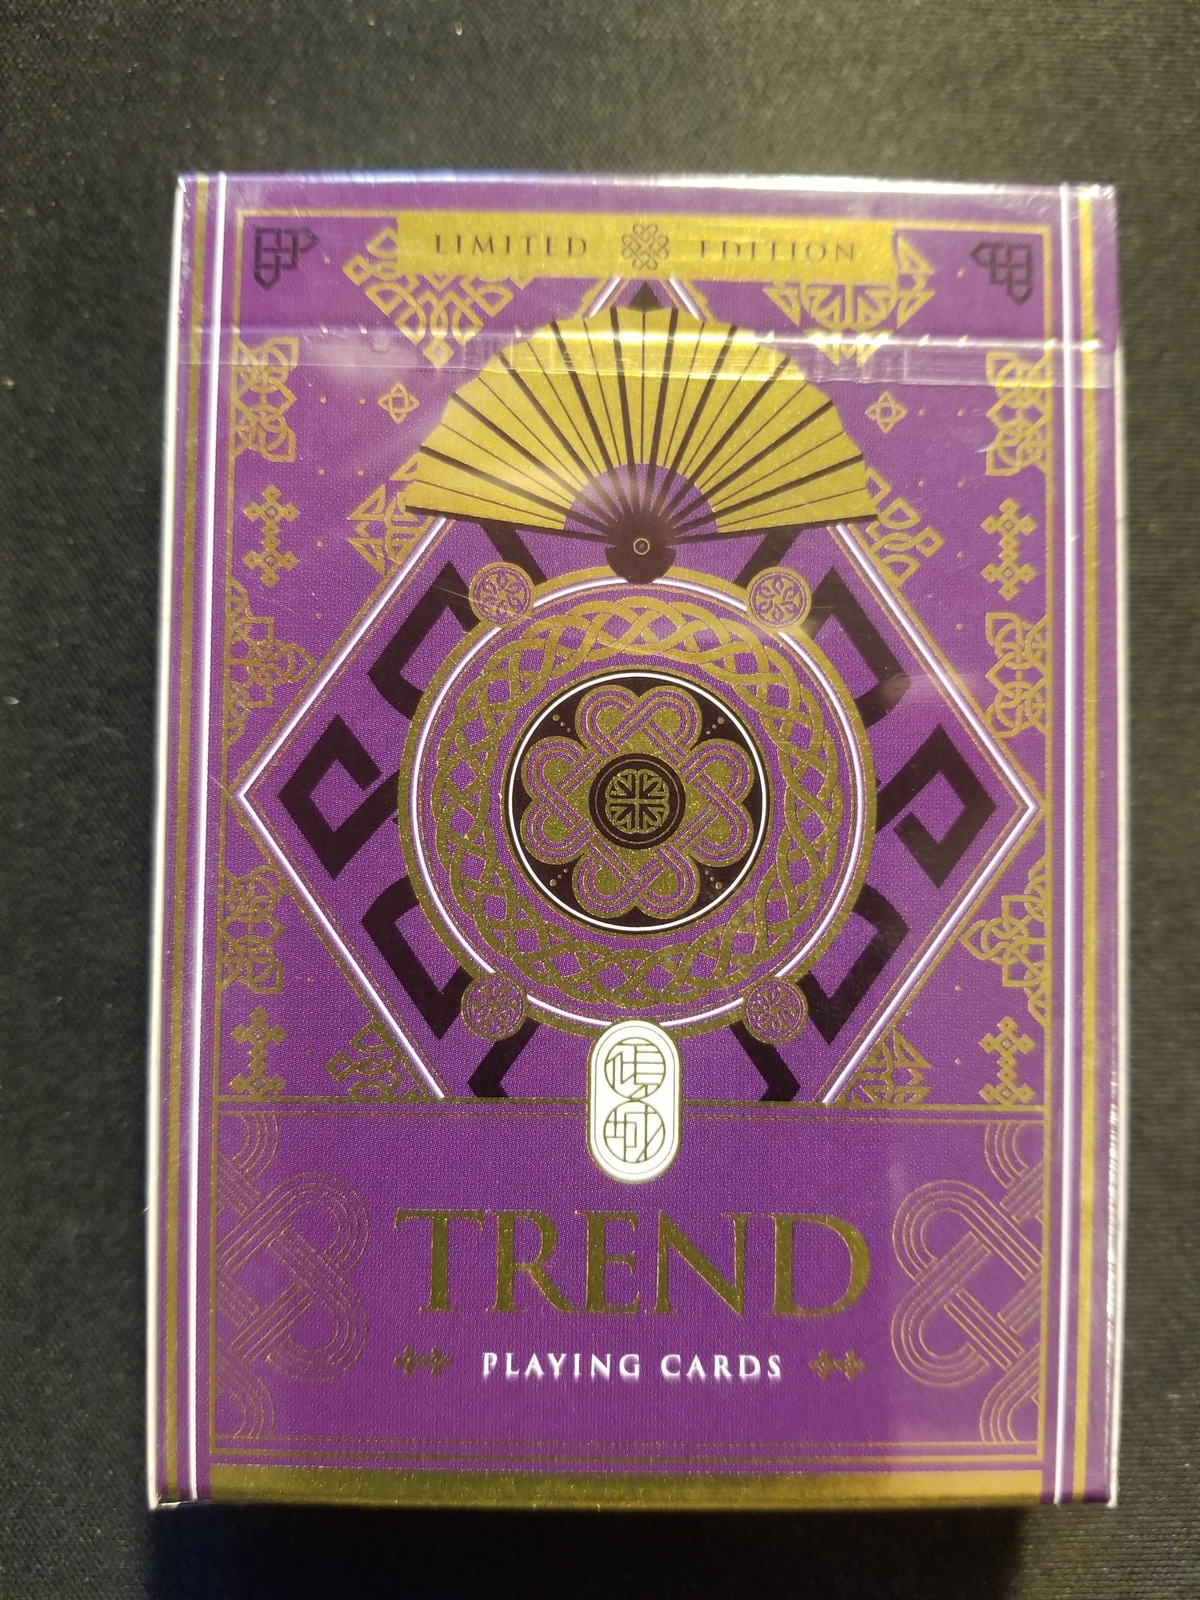 Trend (Purple) Playing Cards by TCC. Specifically, for Cardistry Art